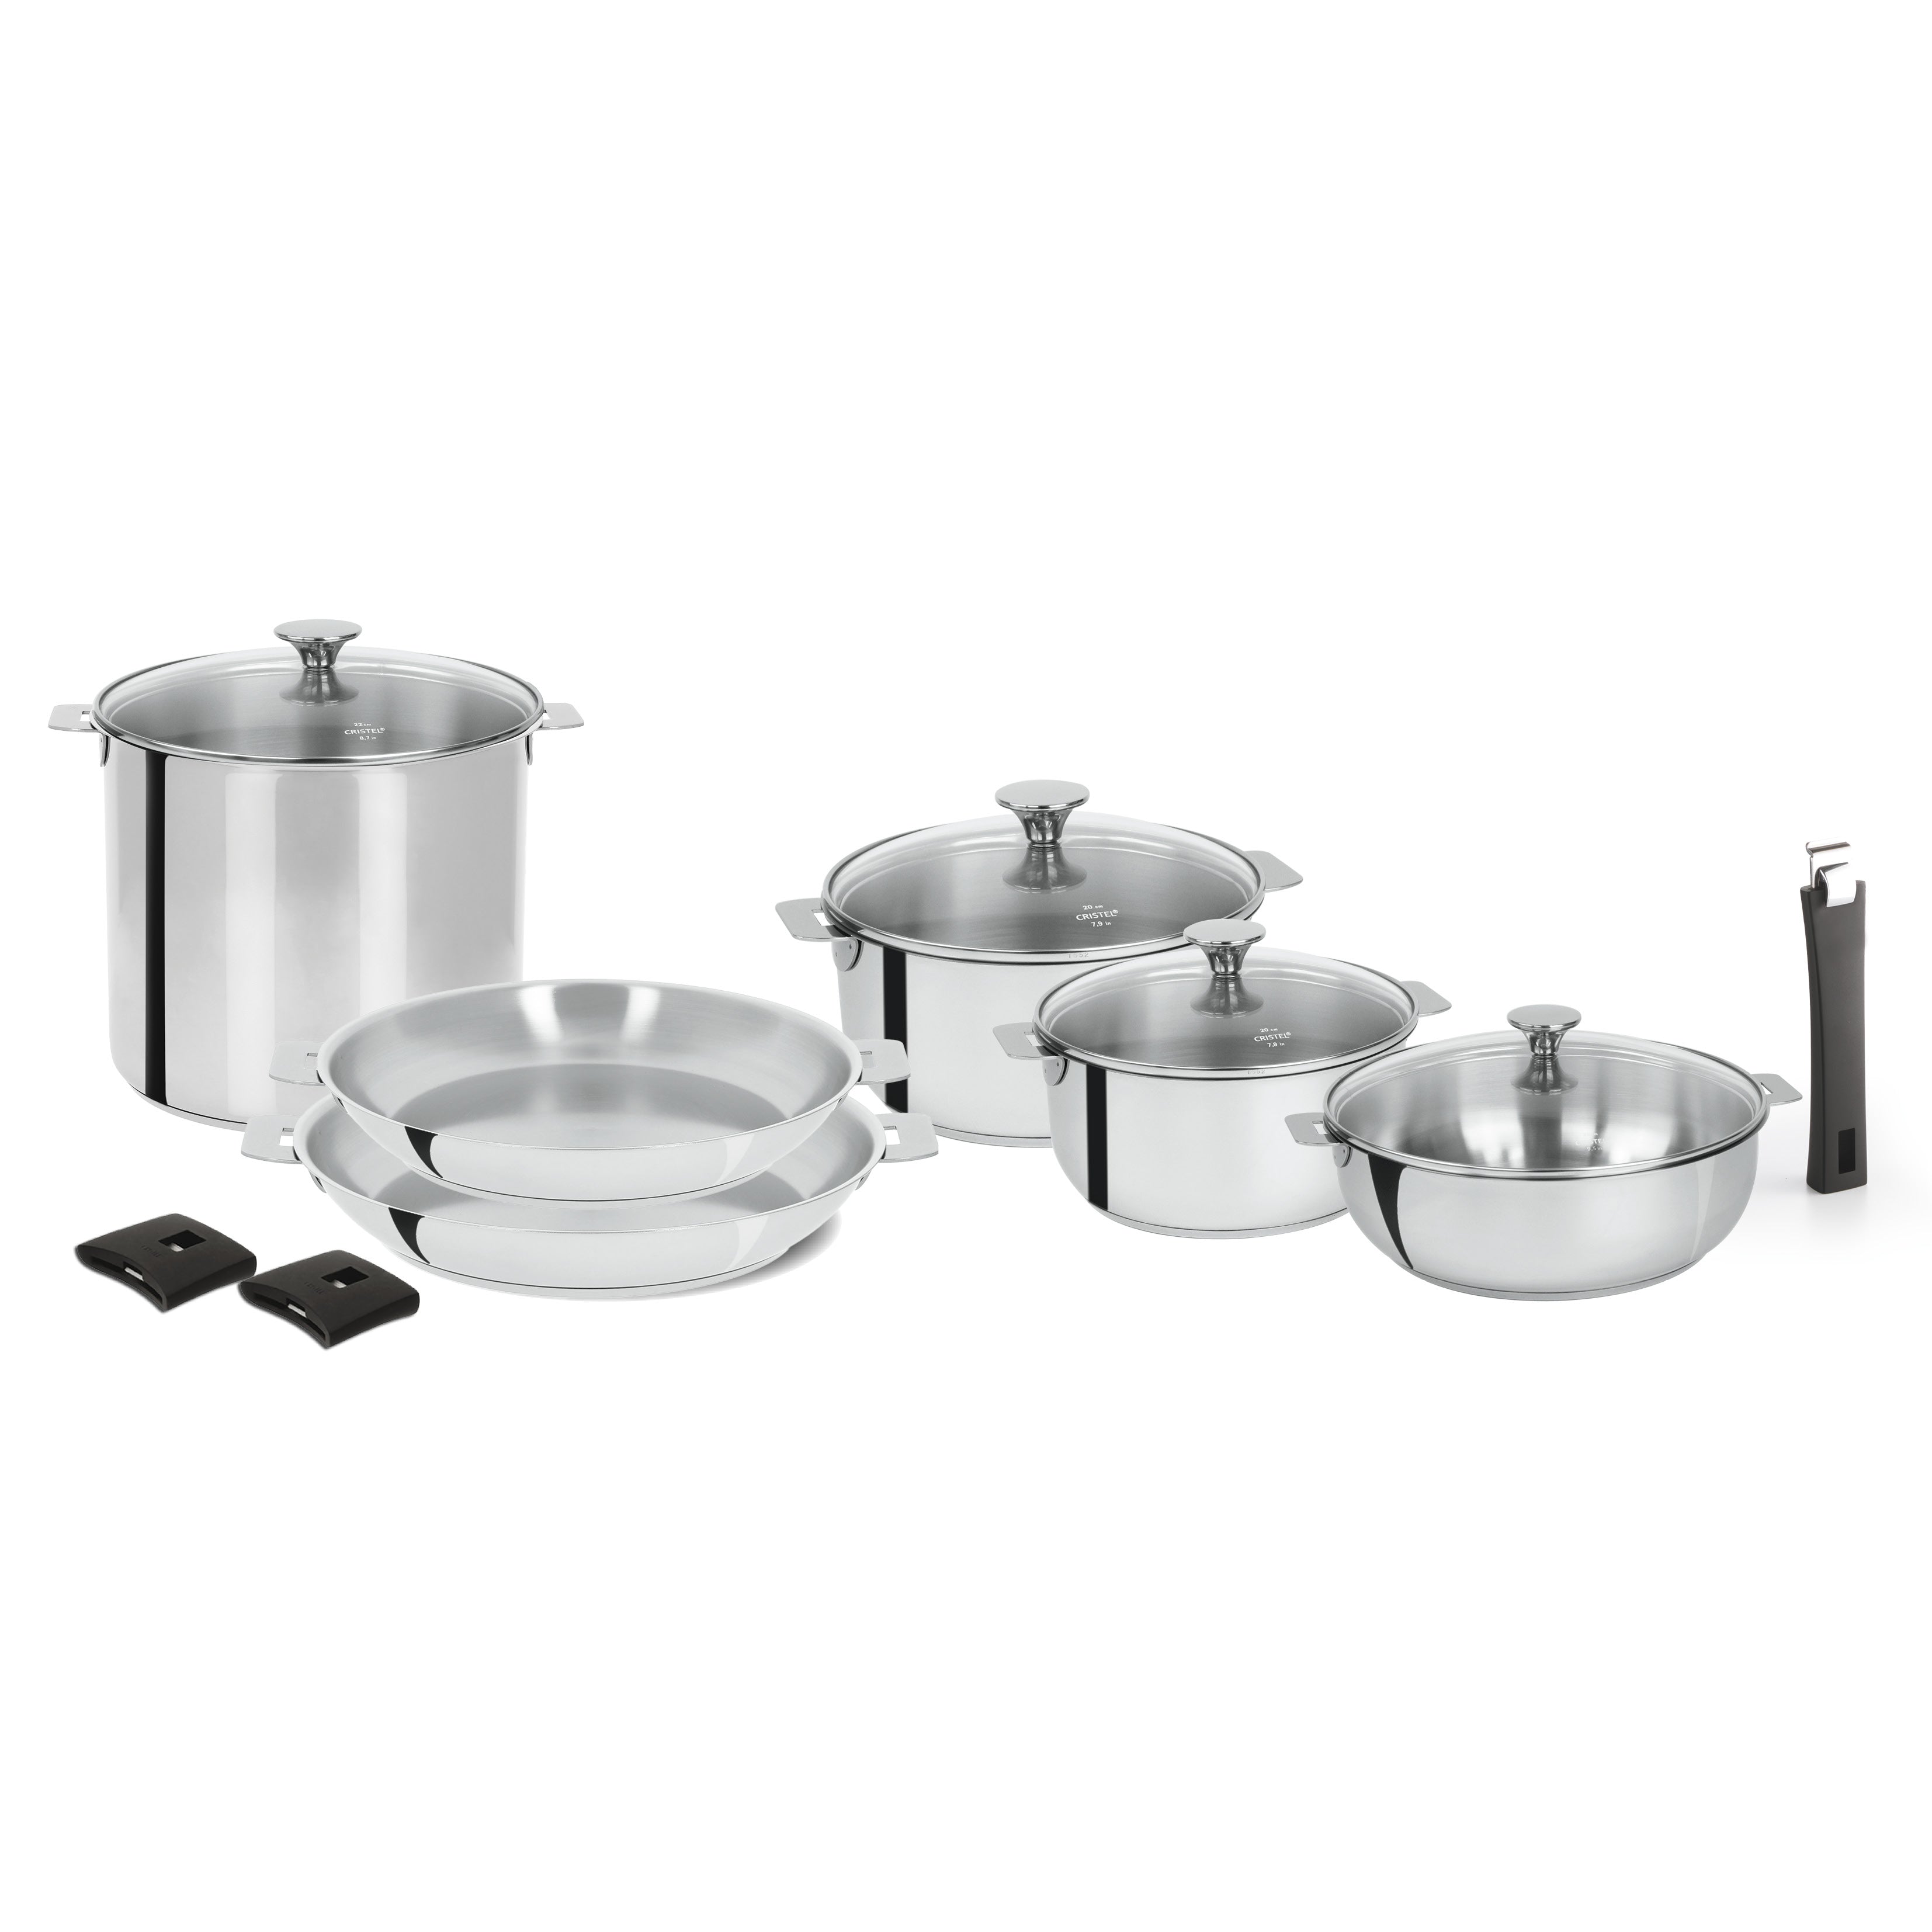 Trending to!🤍 3 Piece Cookware Set with Detachable Handle🍳 Ilang